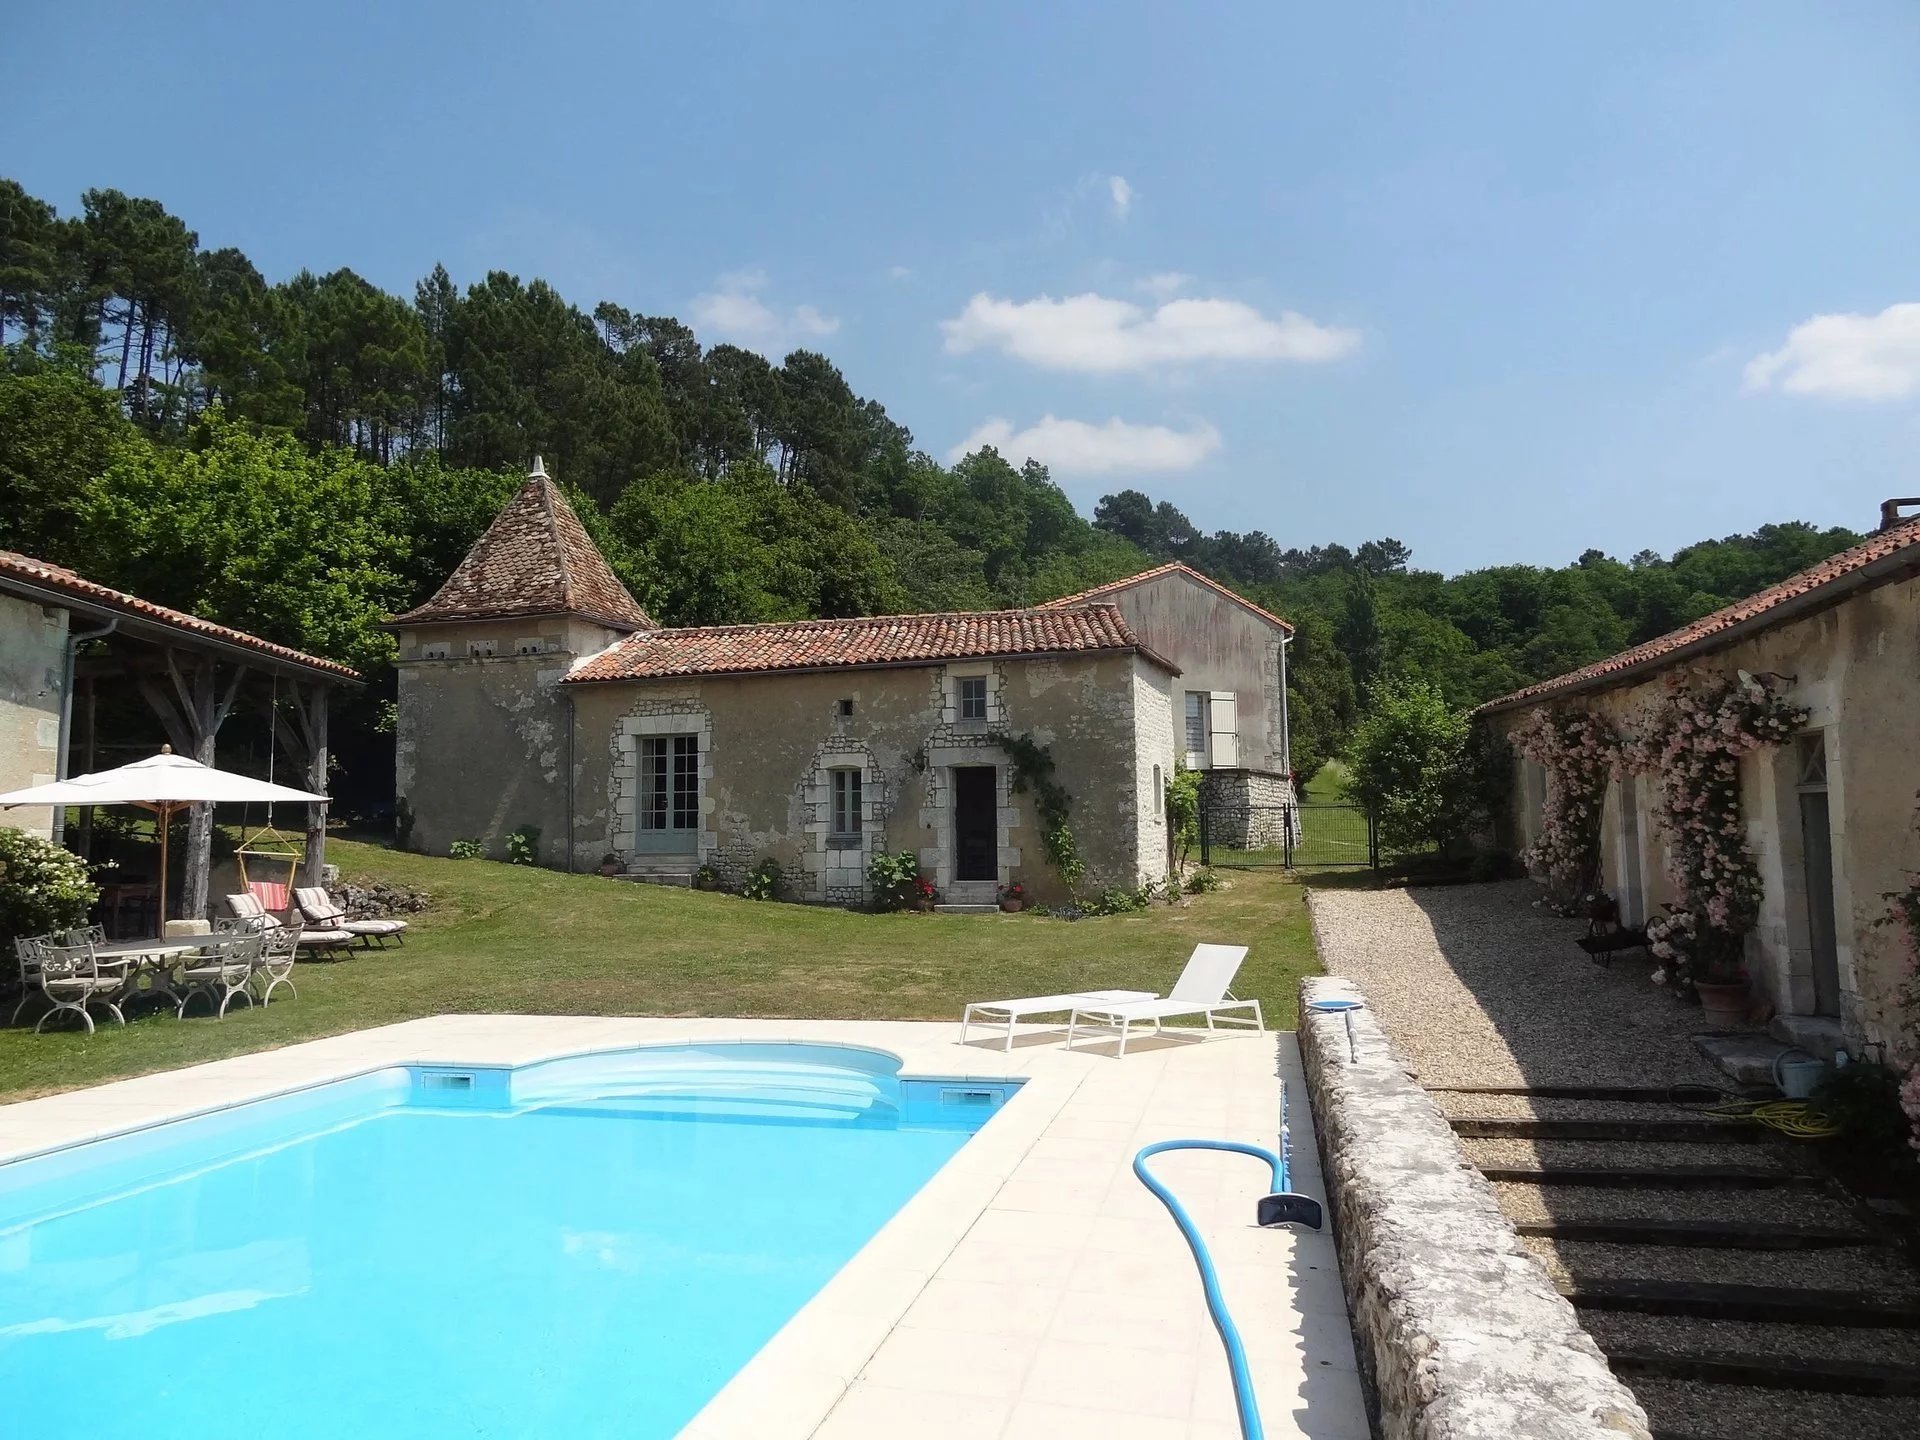 Pretty Charentaise longère style property with swimming pool